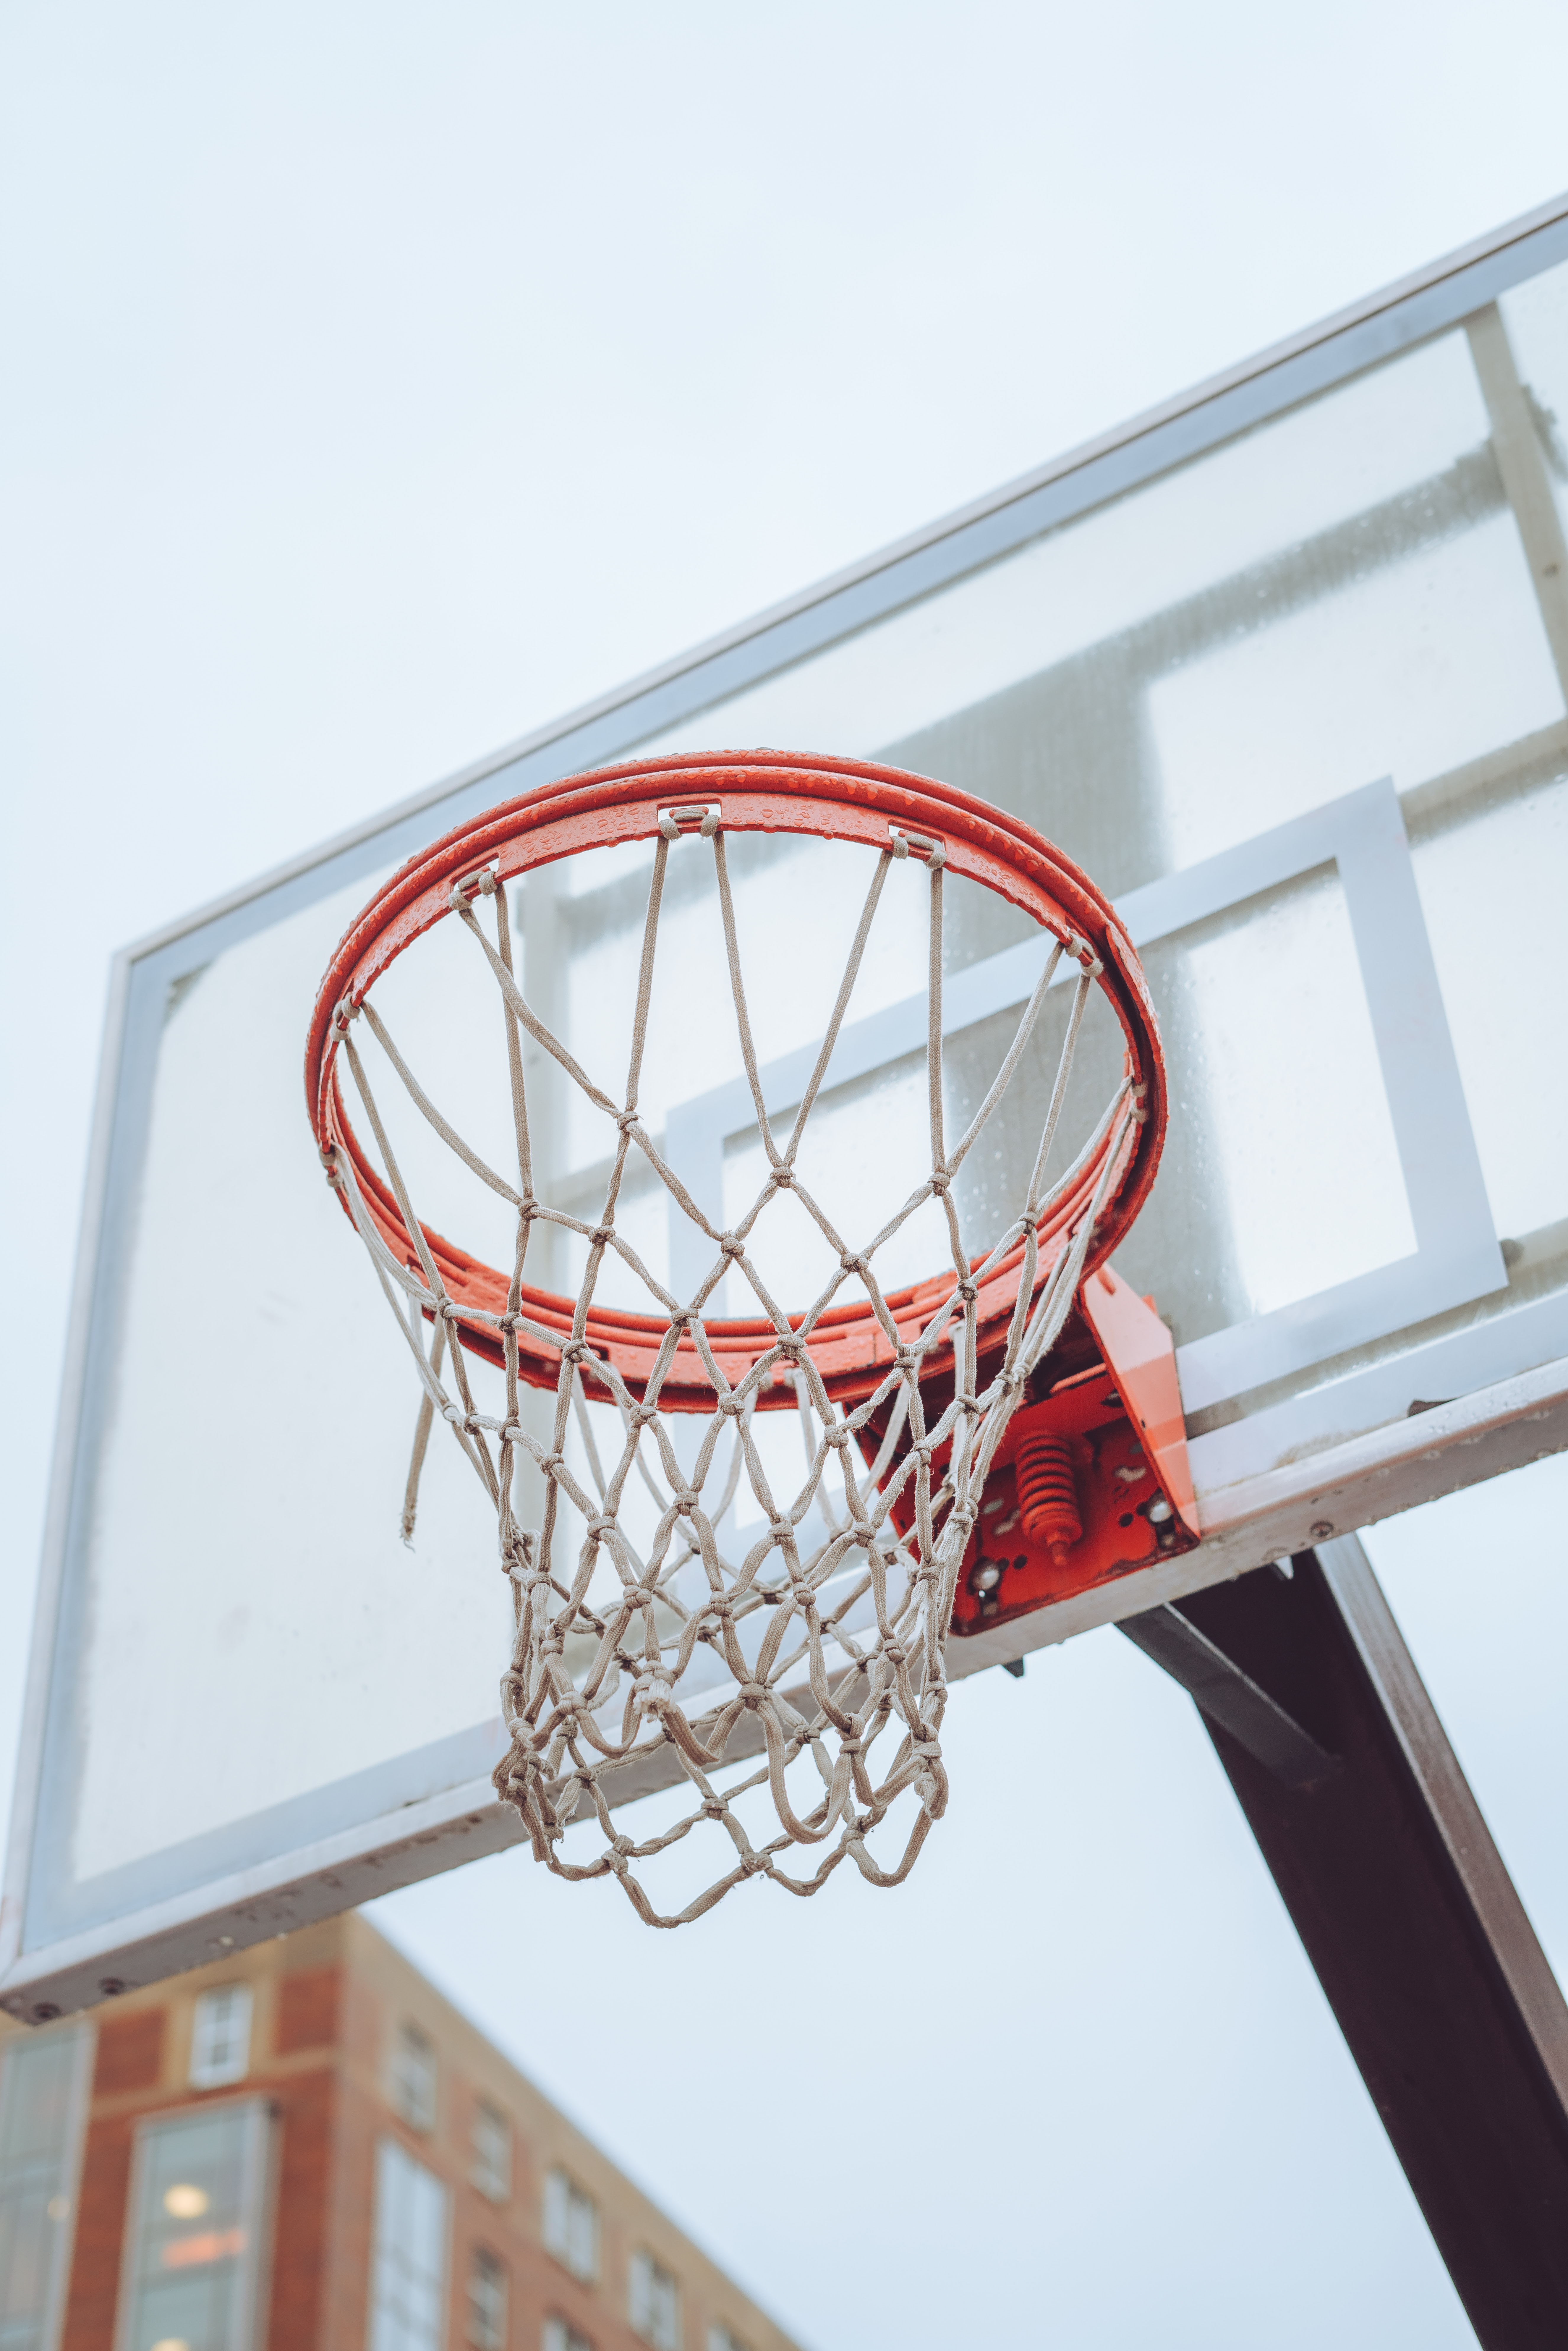 Download Phone wallpaper grid, basketball ring, sports, scute